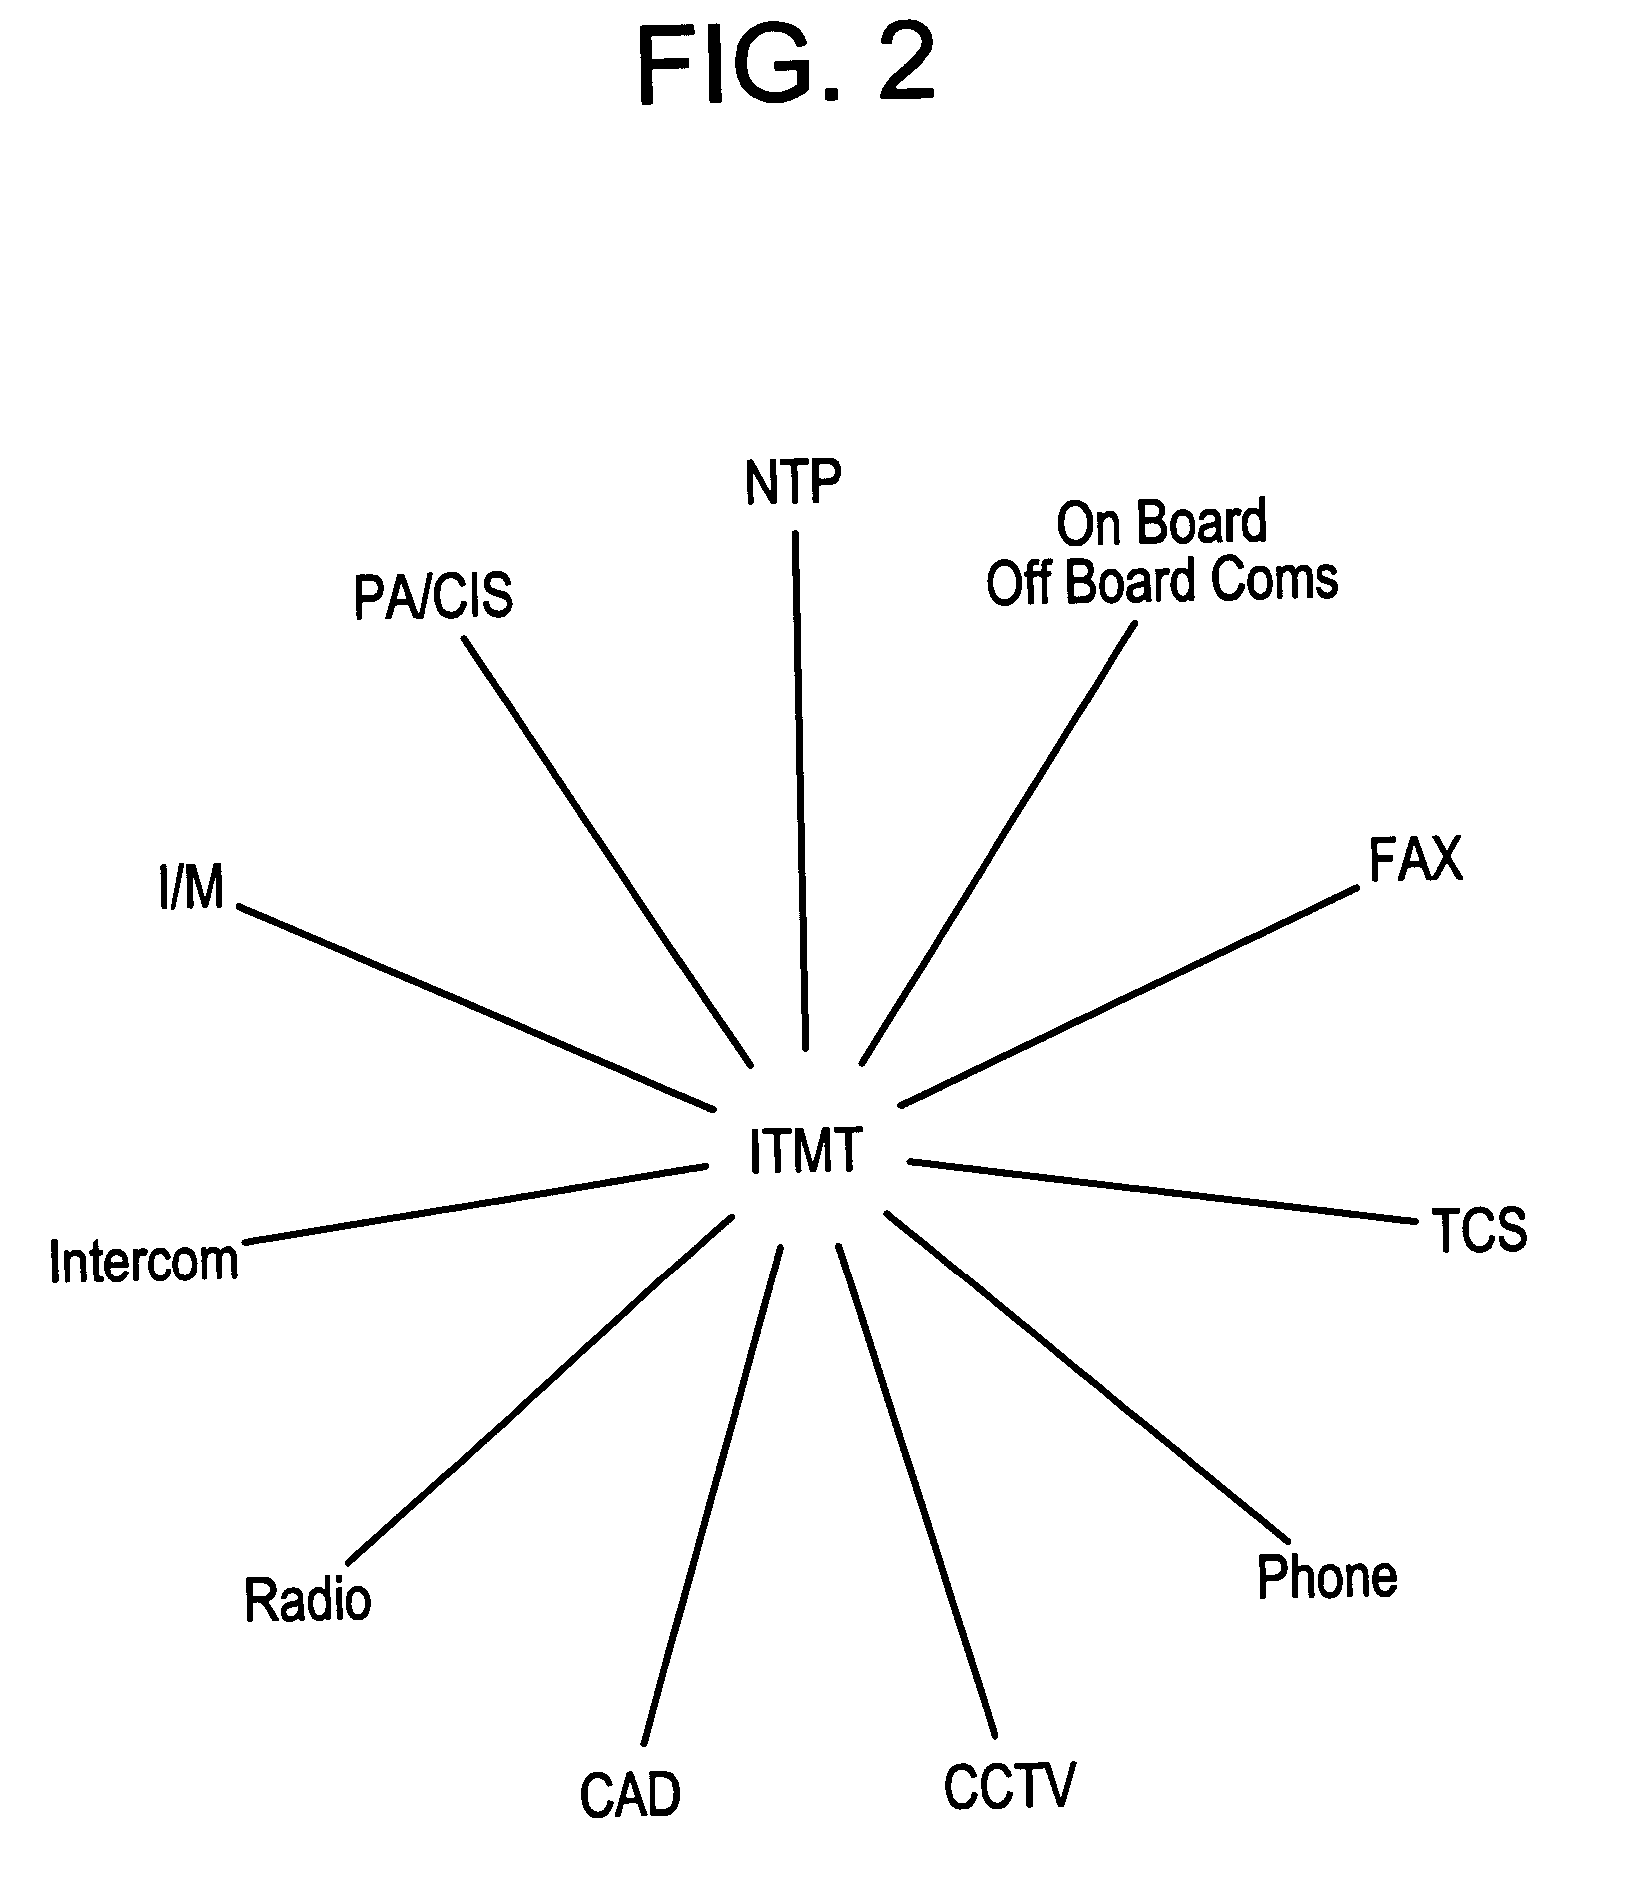 Method, system, and storage medium for integrating vehicle management, transportation and communications functions